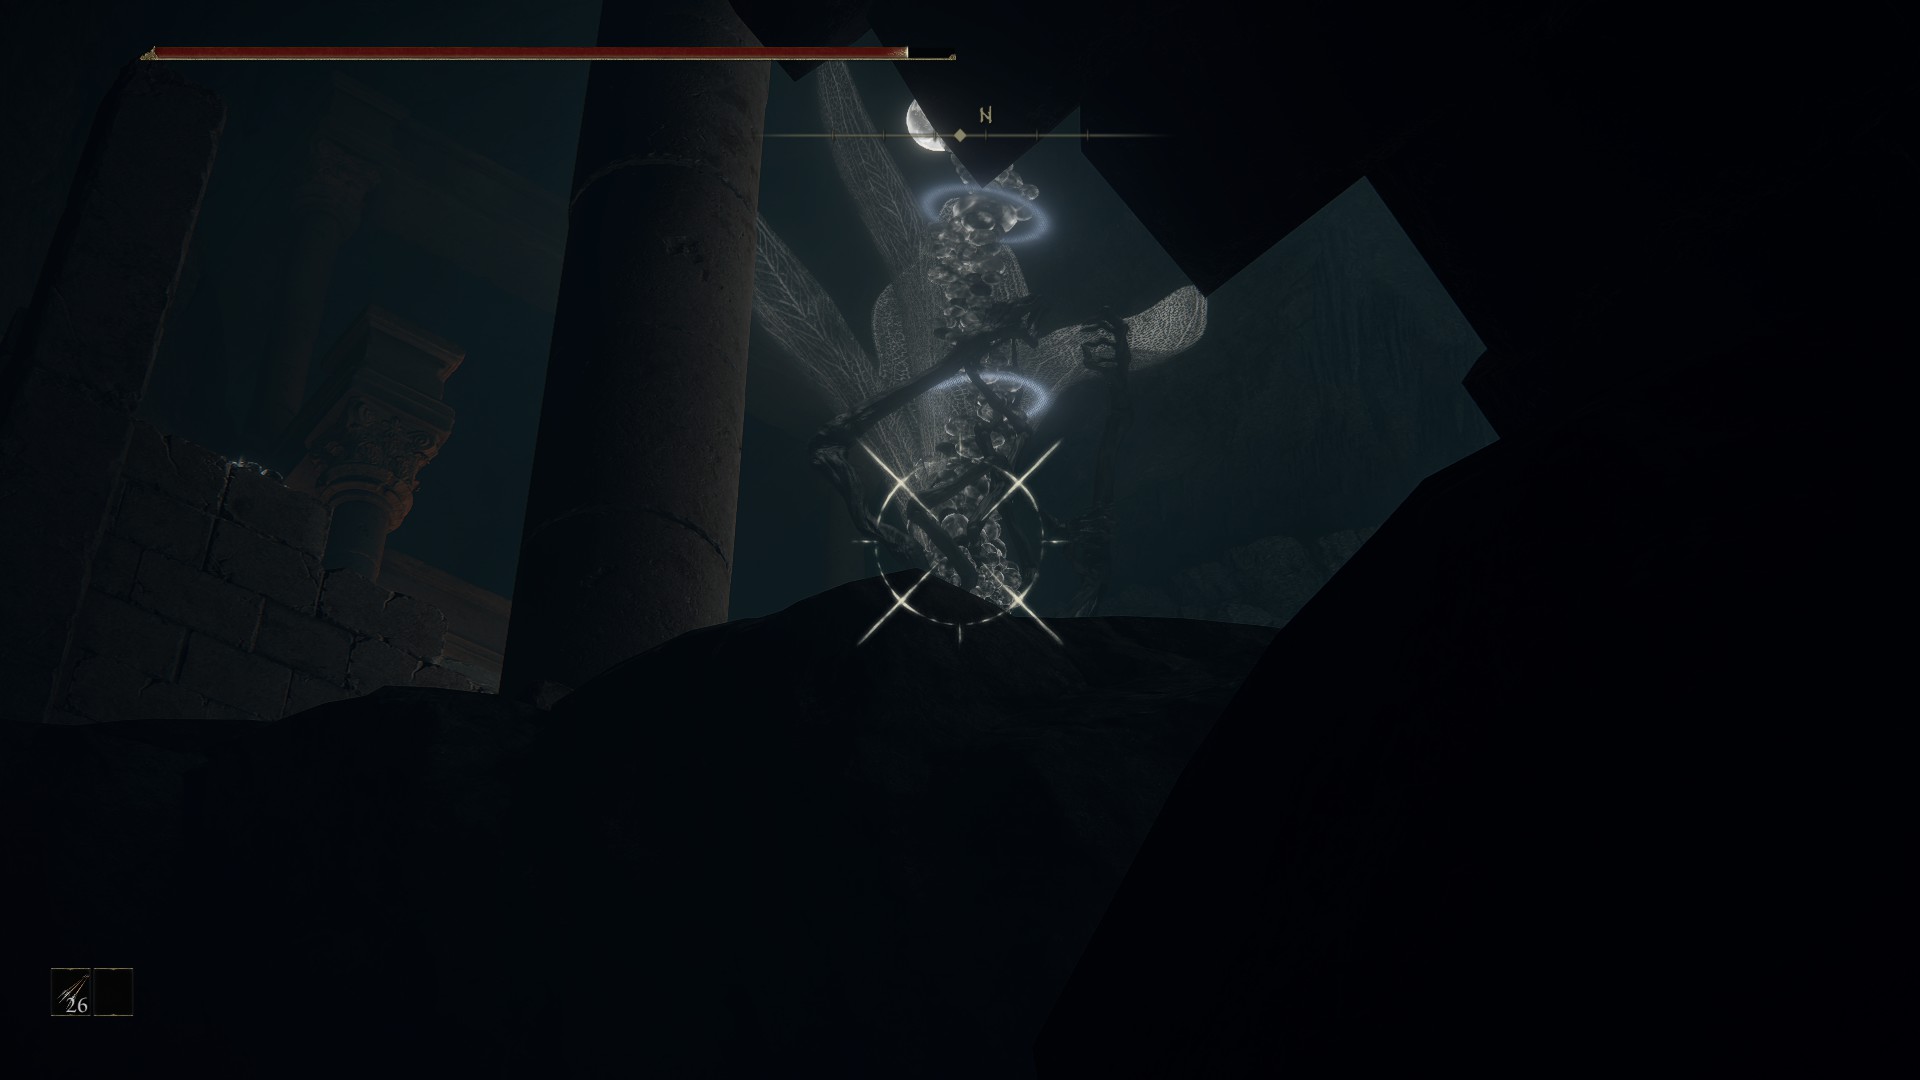 Easy Malformed Star Kill In Uhl Palace Ruins image 8